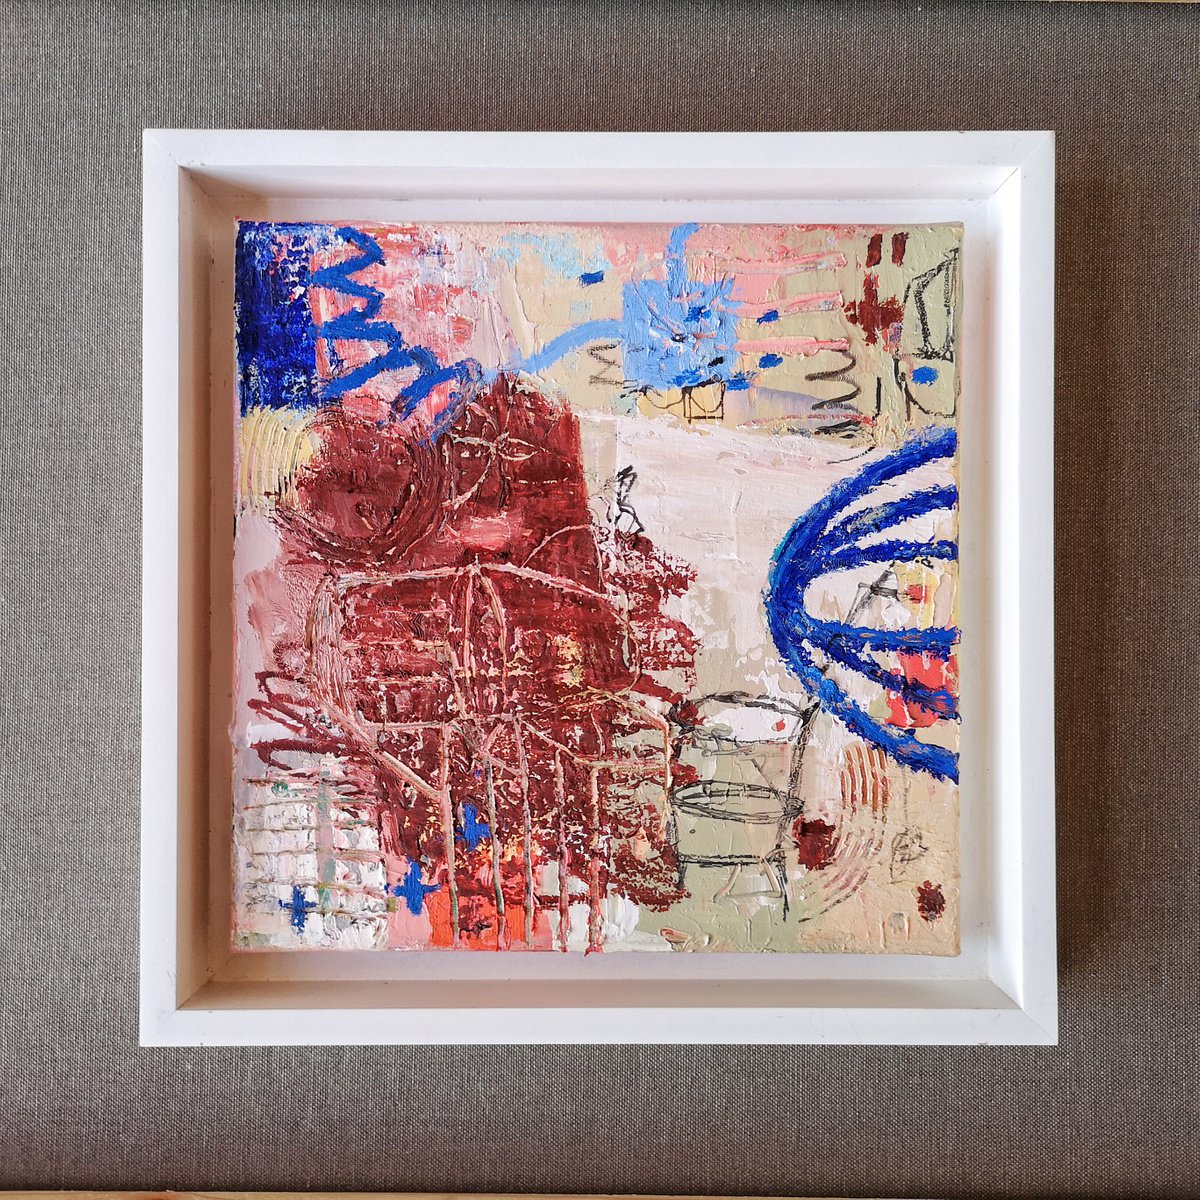 Sixth Dream - framed small abstract artwork/home decor gift by Jenny Furman